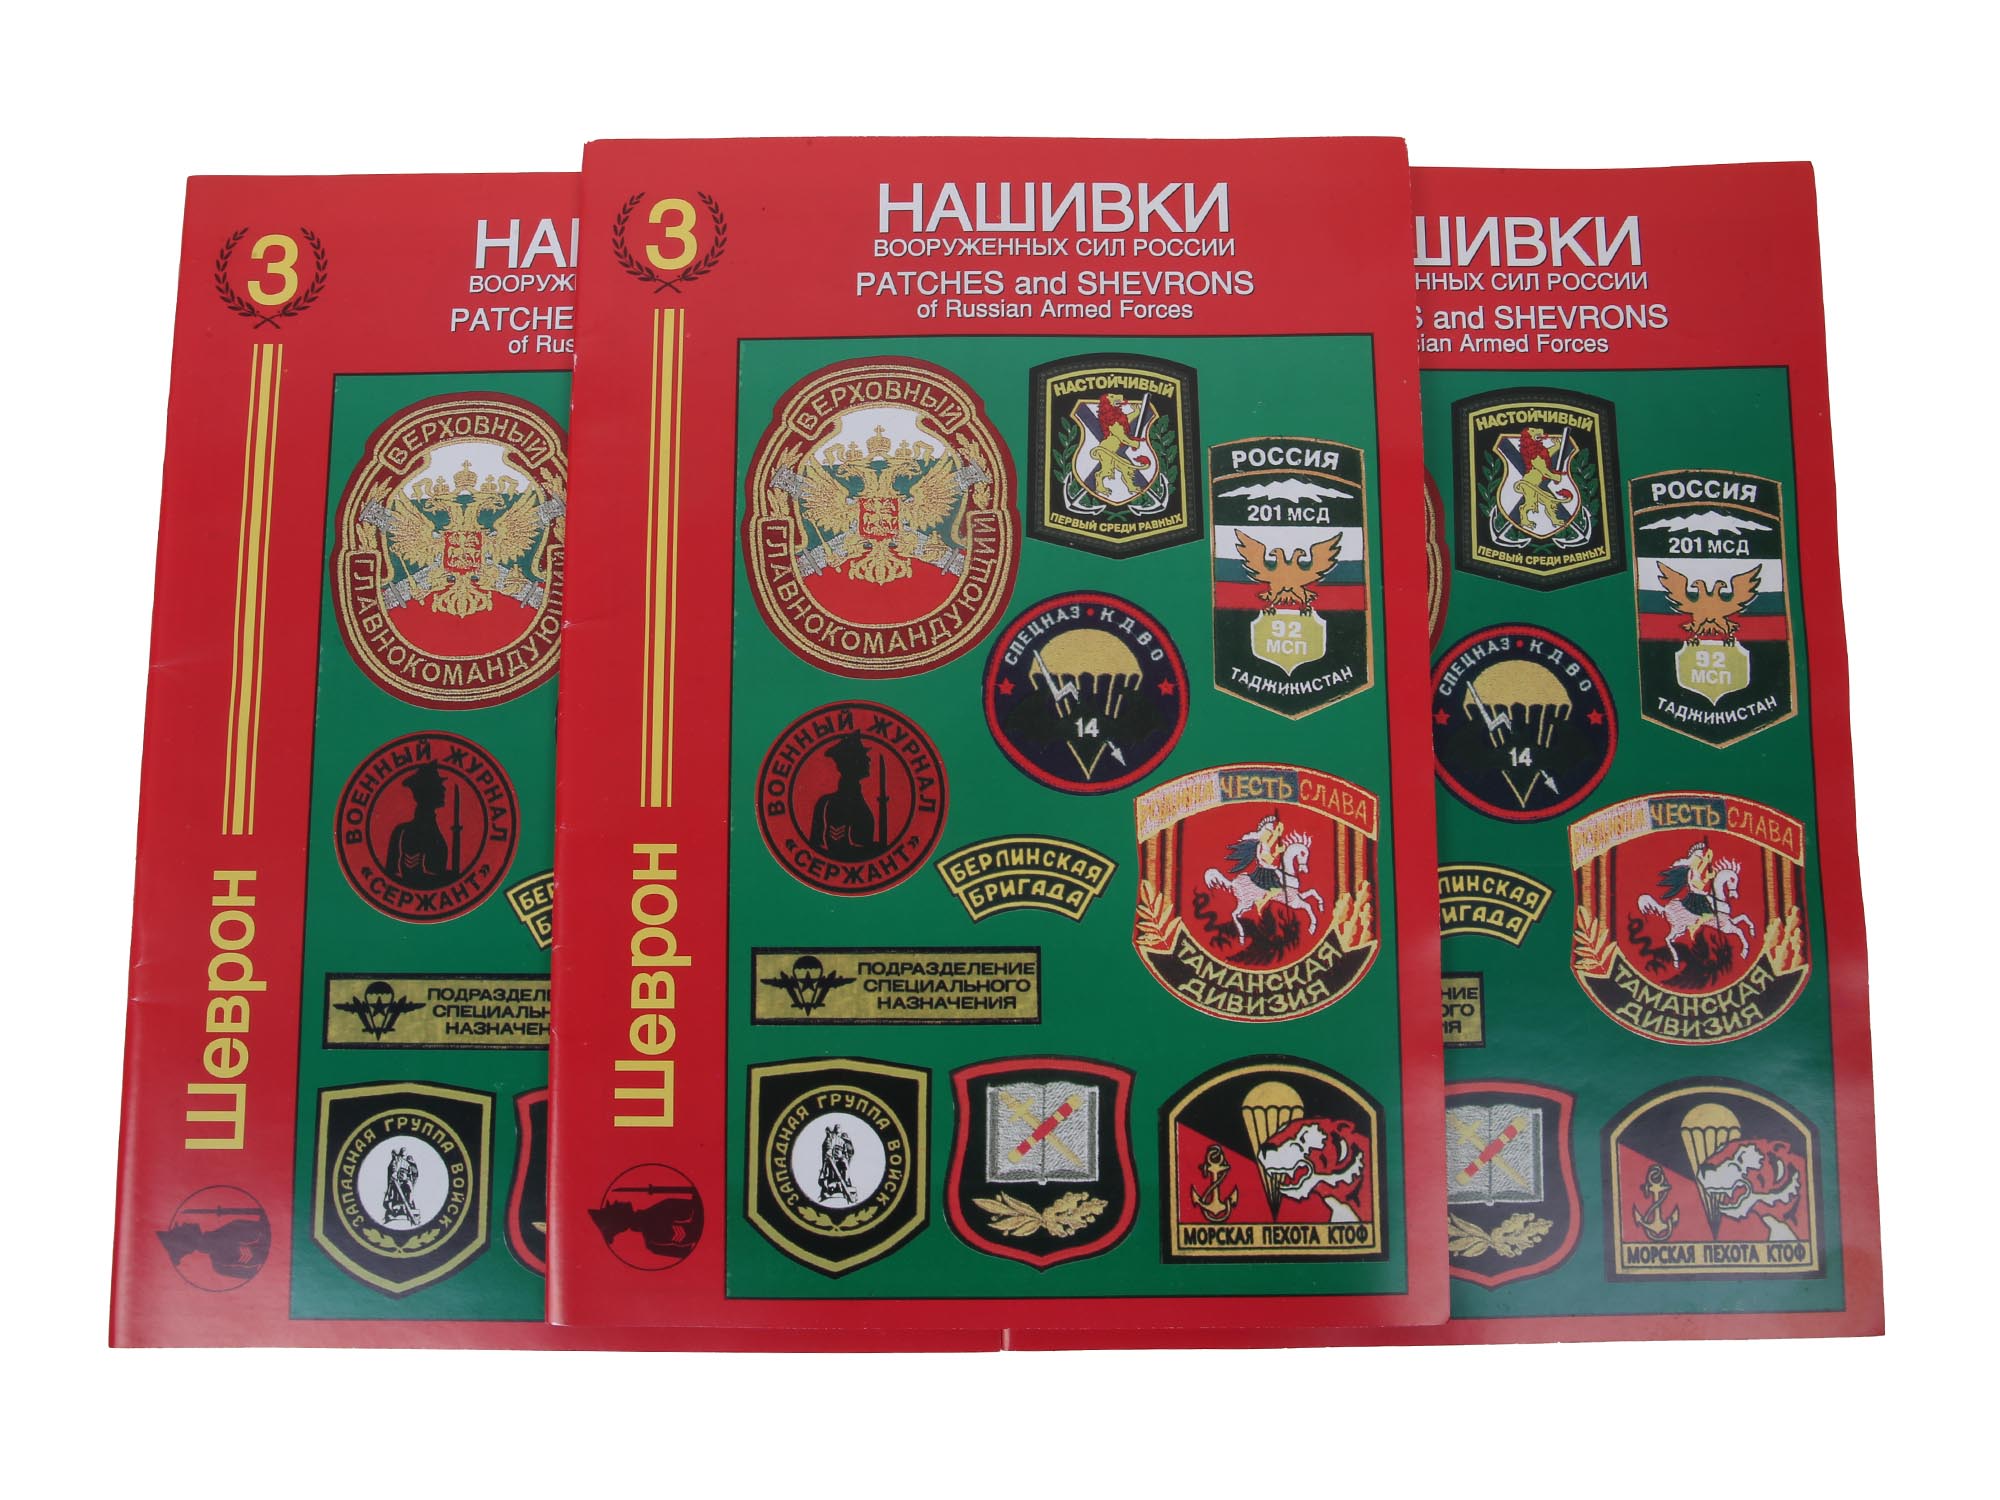 RUSSIAN MILITARY SLEEVE PATCHES AND SHEVRON BOOKS PIC-5